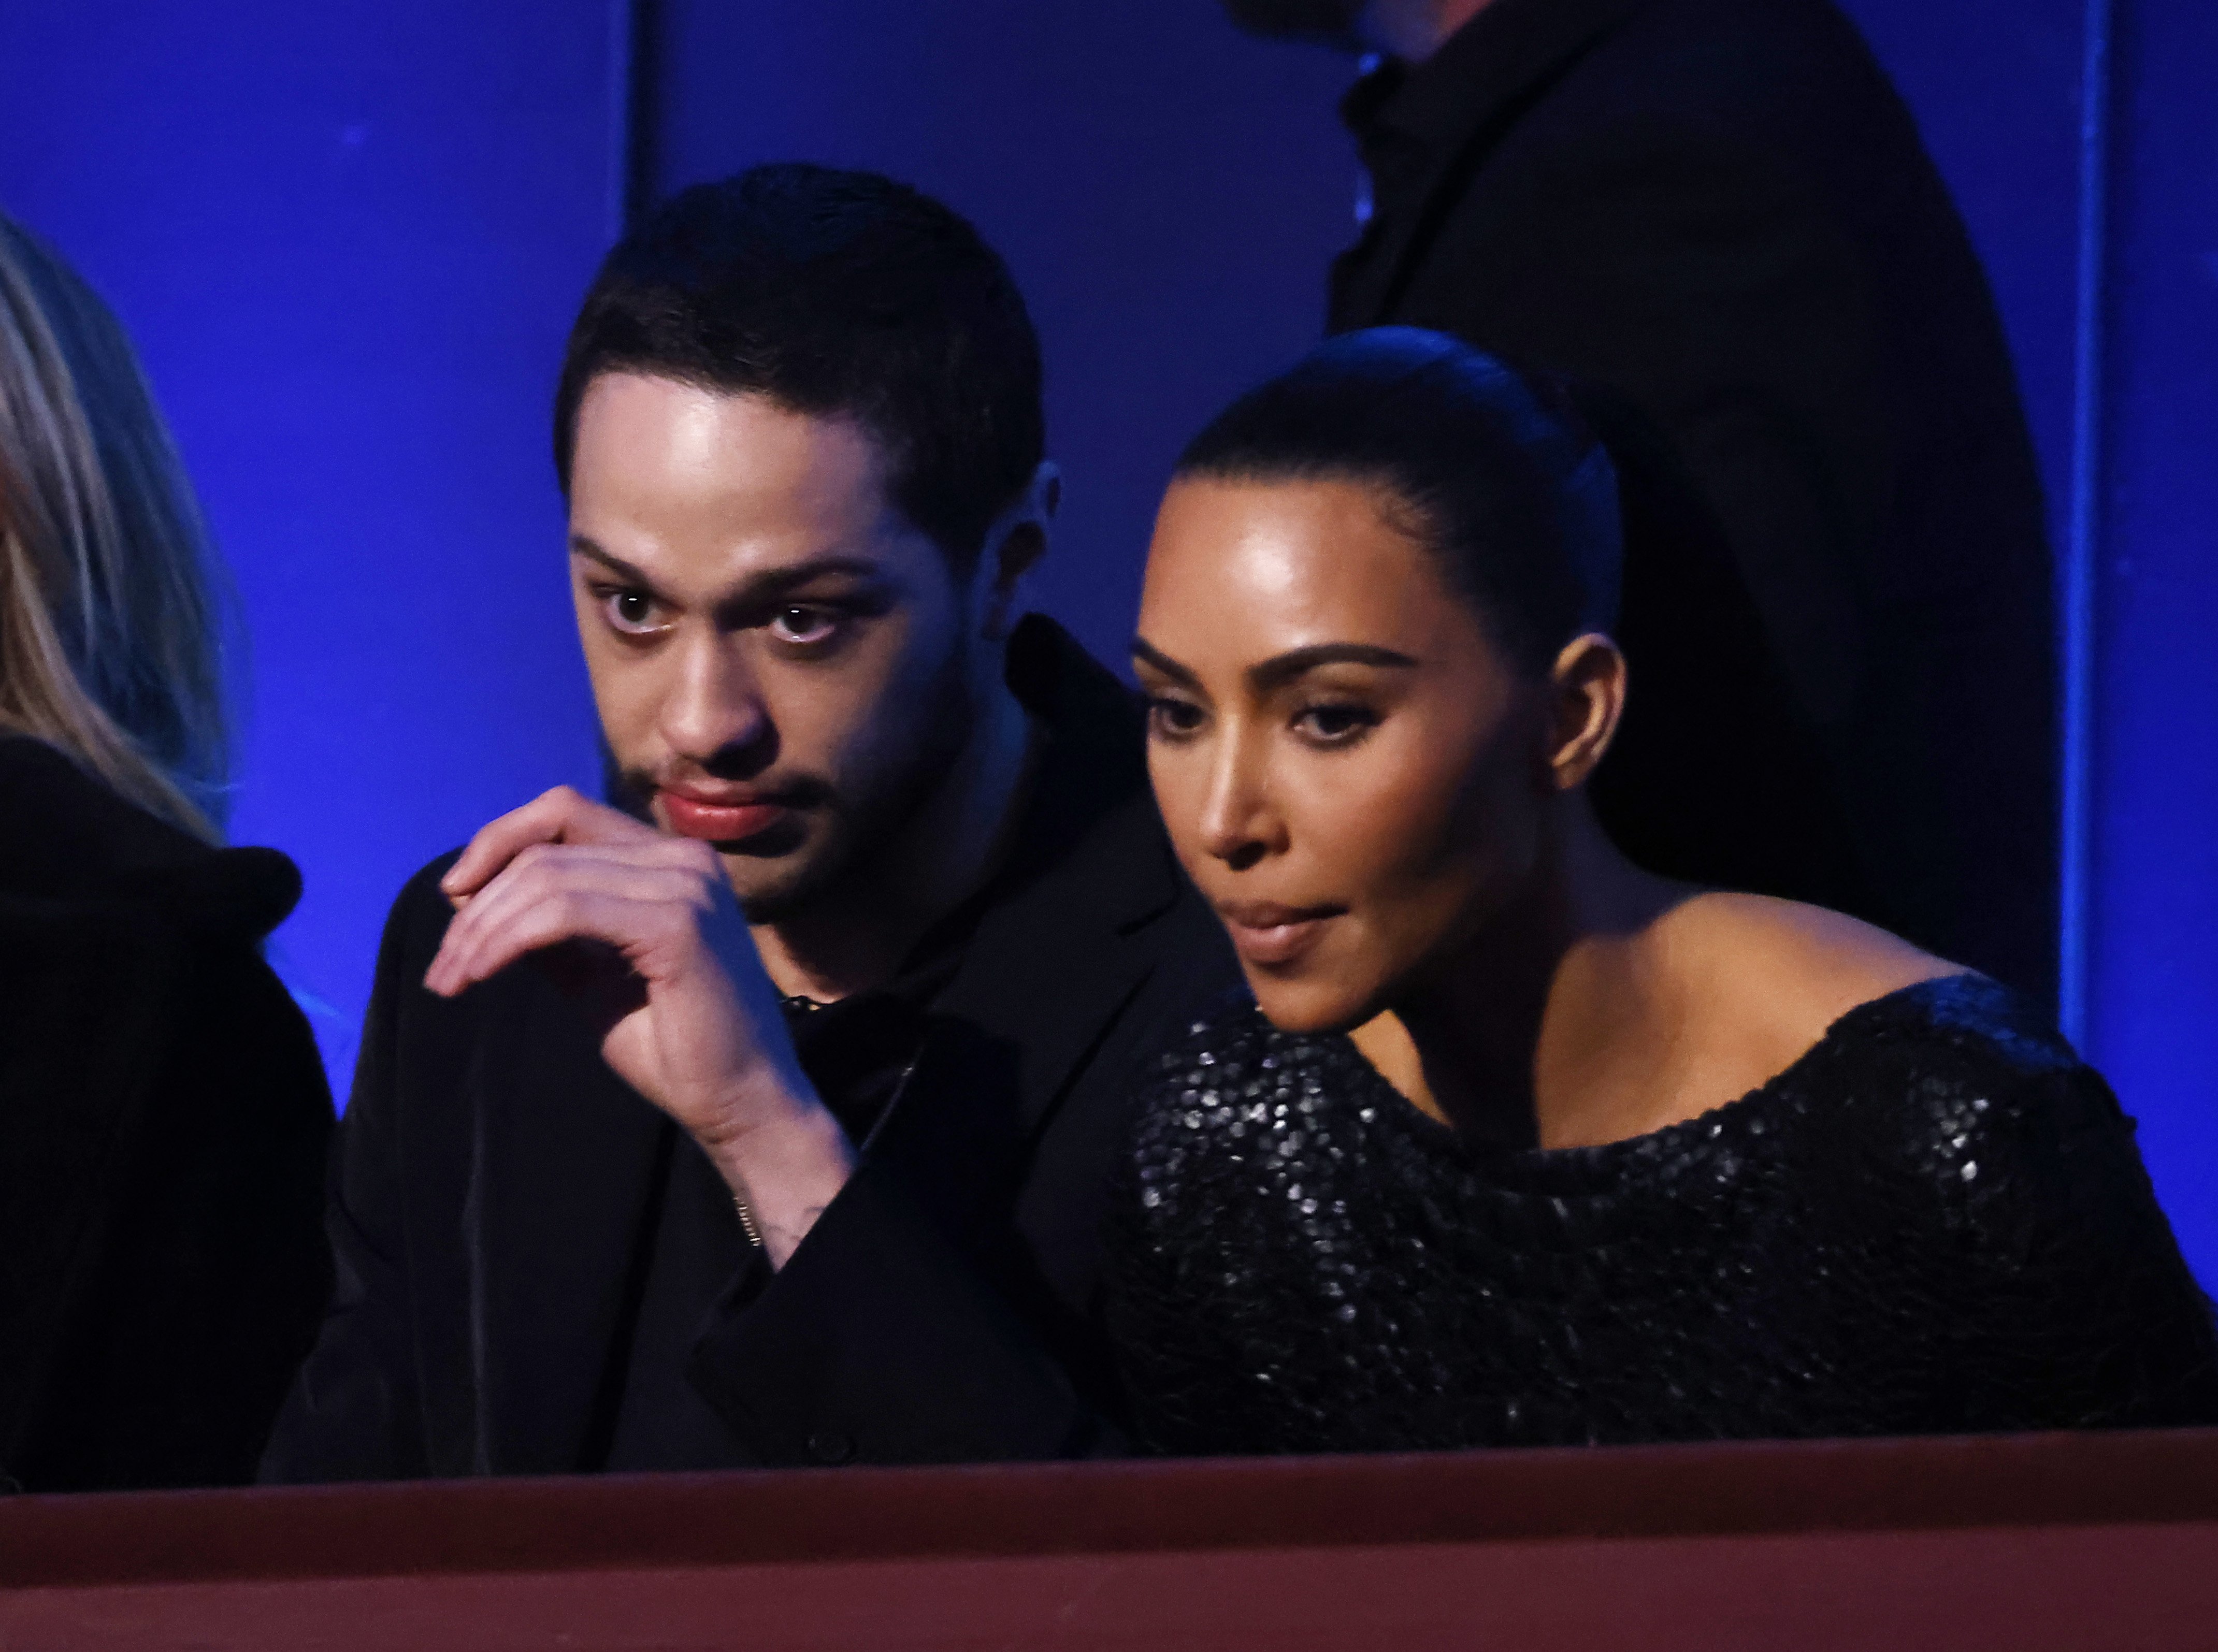 Pete Davidson and Kim Kardashian at the 23rd Annual Mark Twain Prize For American Humor at The Kennedy Center on April 24, 2022 in Washington, DC. | Source: Getty Images